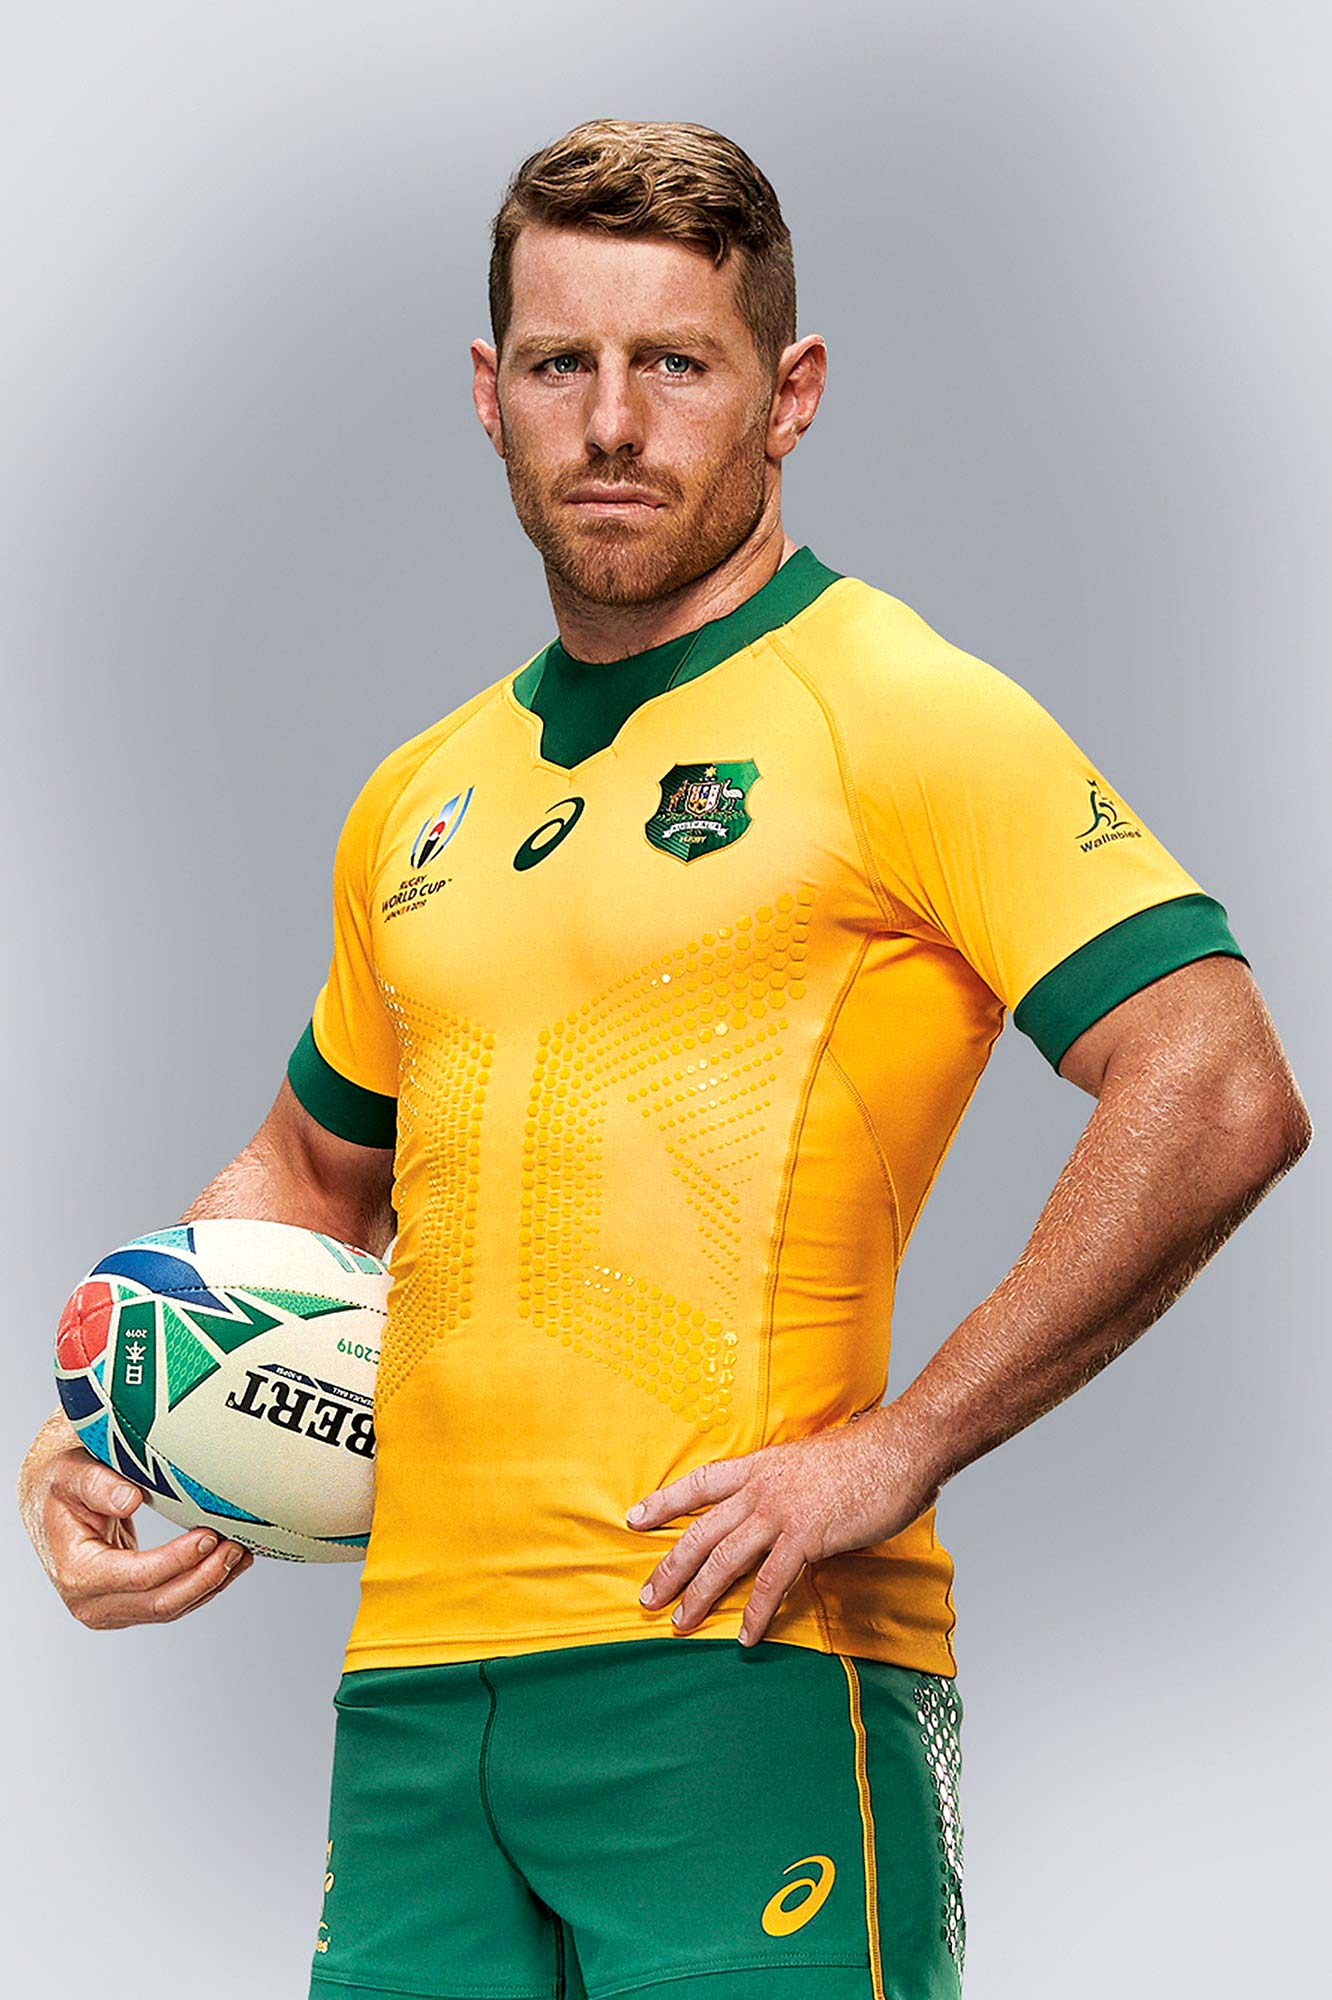 Rugby star Bernard Foley Posing for ASICS Globals portrait shoot ahead of the rugby world cup campaign